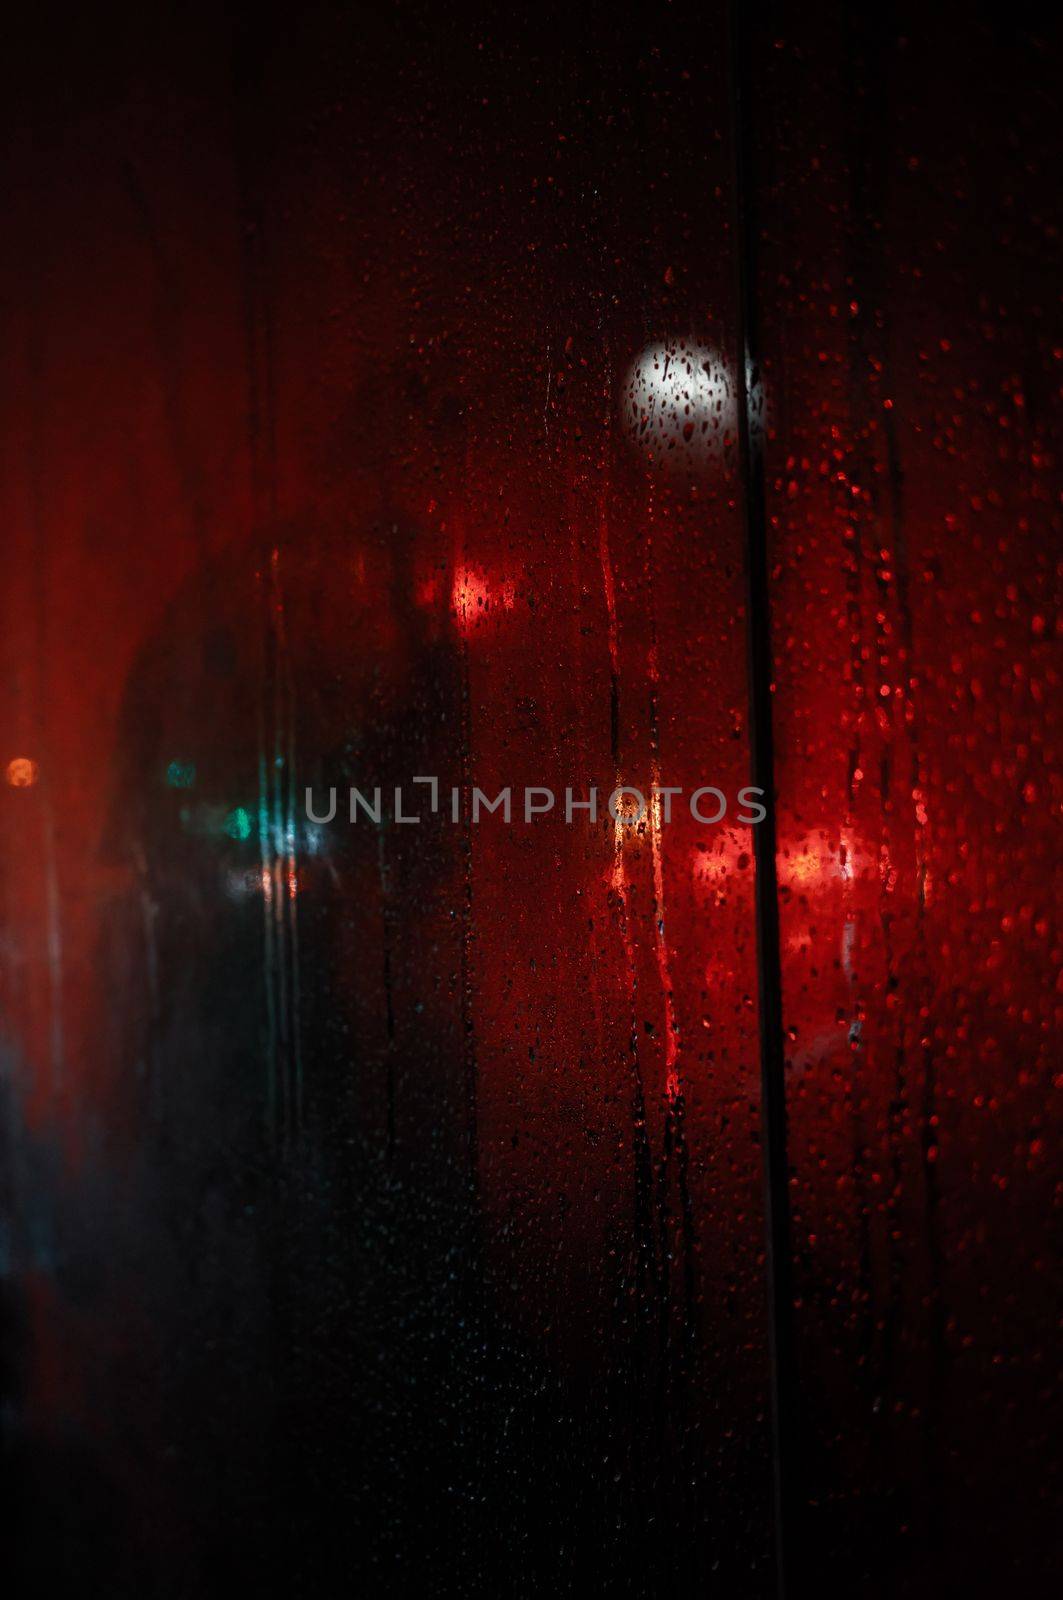 Blackout in Kyiv. Glass showcases with drops of rain and sleet on the streets of Kyiv illuminated by the headlights of cars and with silhouettes of people passing by